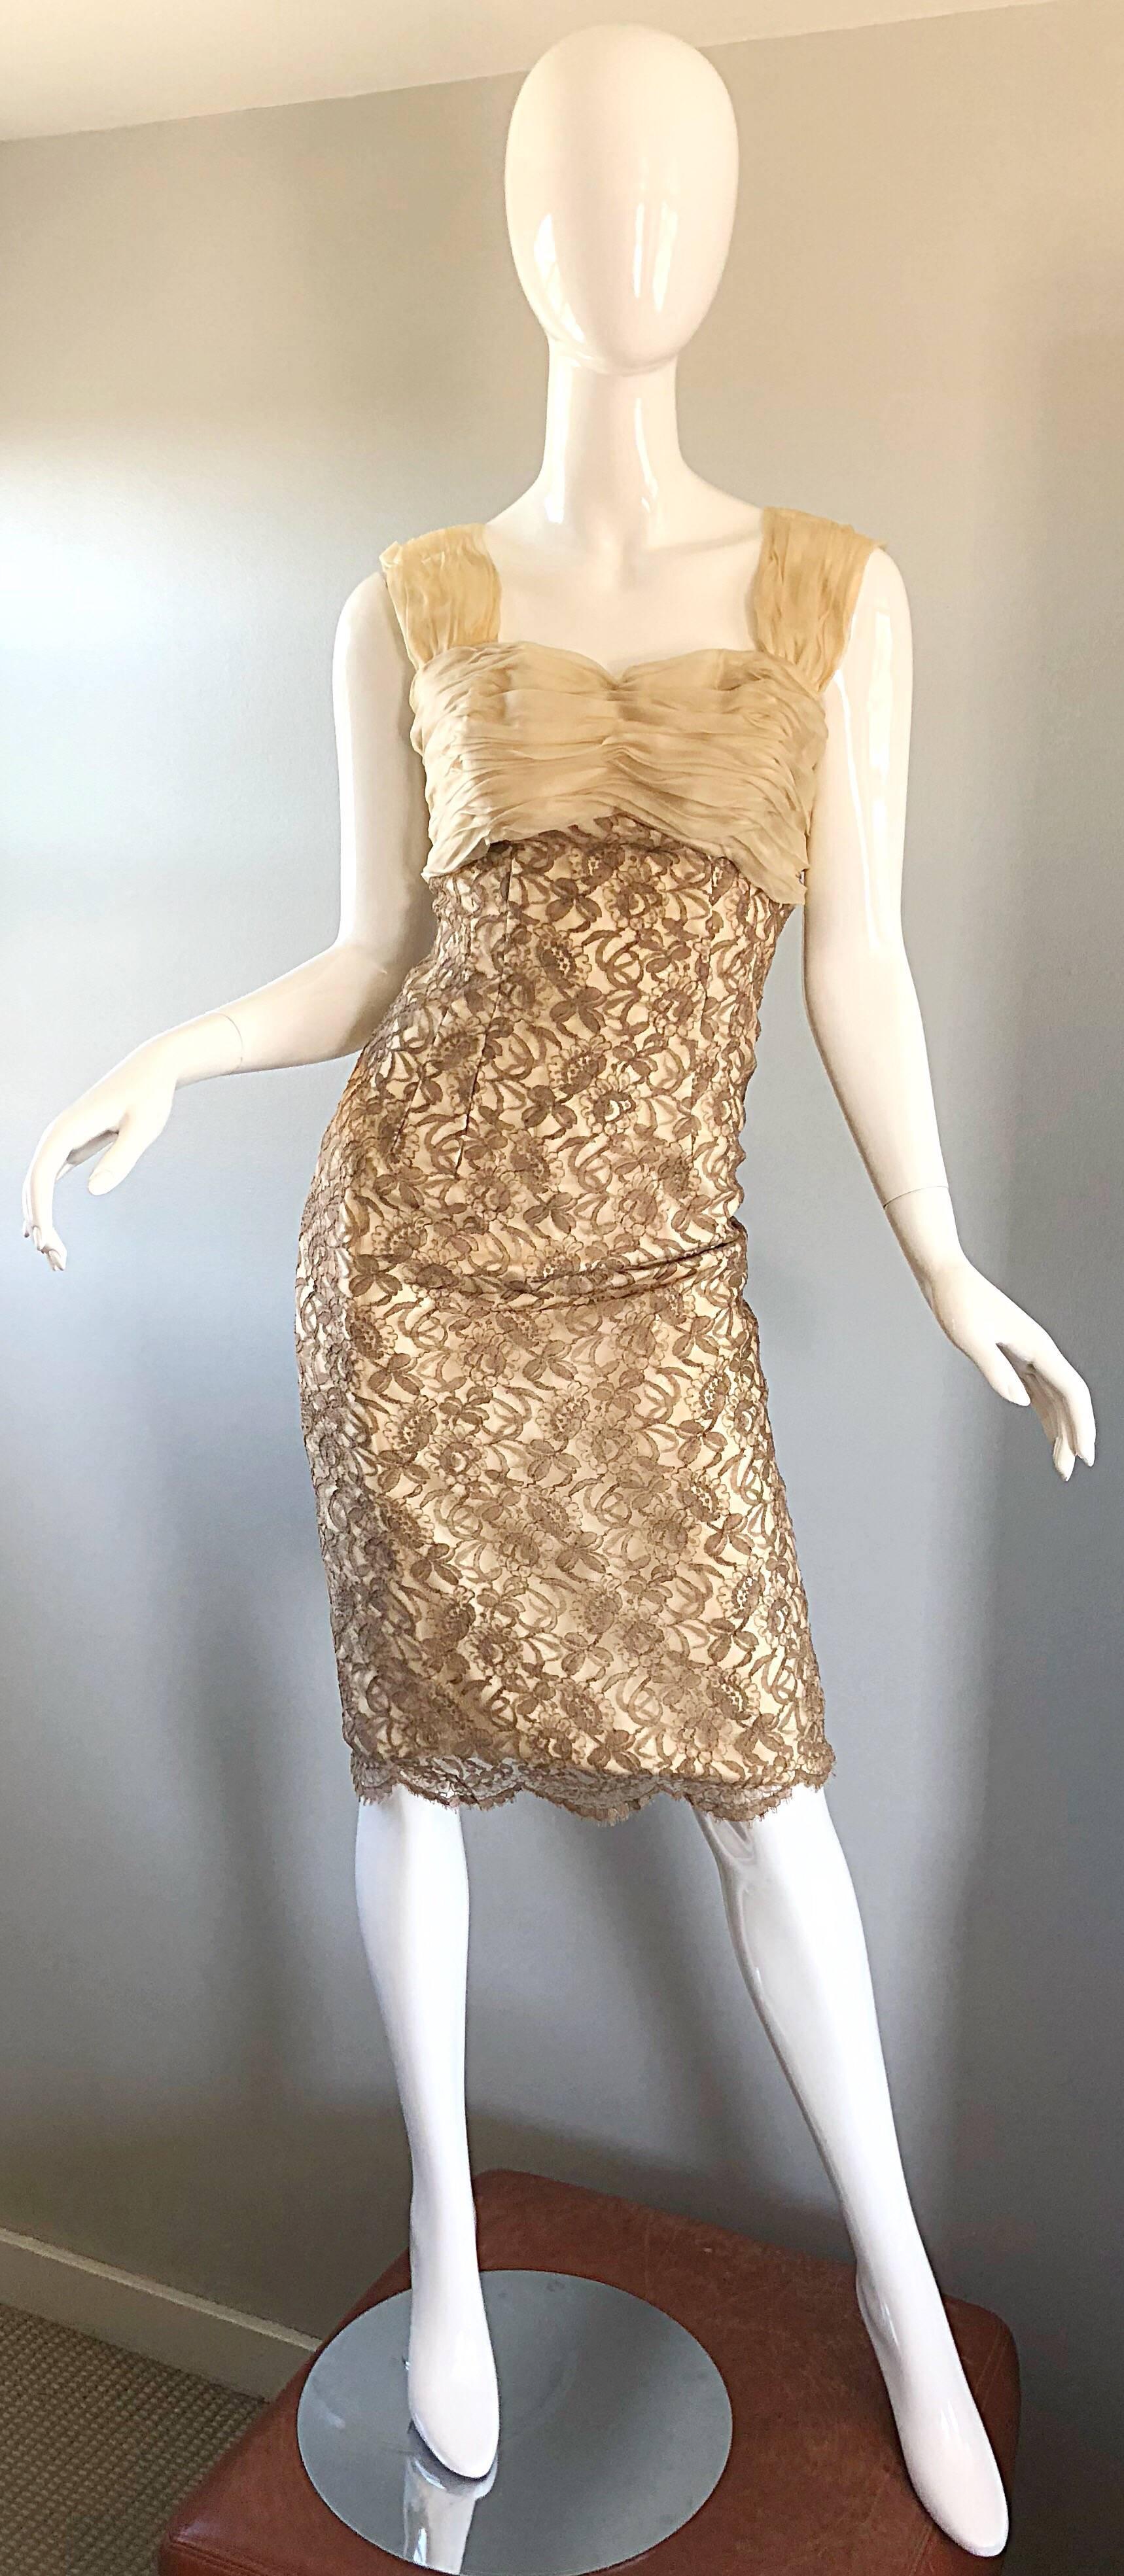 Sensational vintage 1950s demi couture nude French lace dress AND cropped short sleeve bolero jacket! Nearly completely hand sewn, this drop dead beauty features so much detail! Ruched taupe silk chiffon bodice, with a flattering form fitting taupe